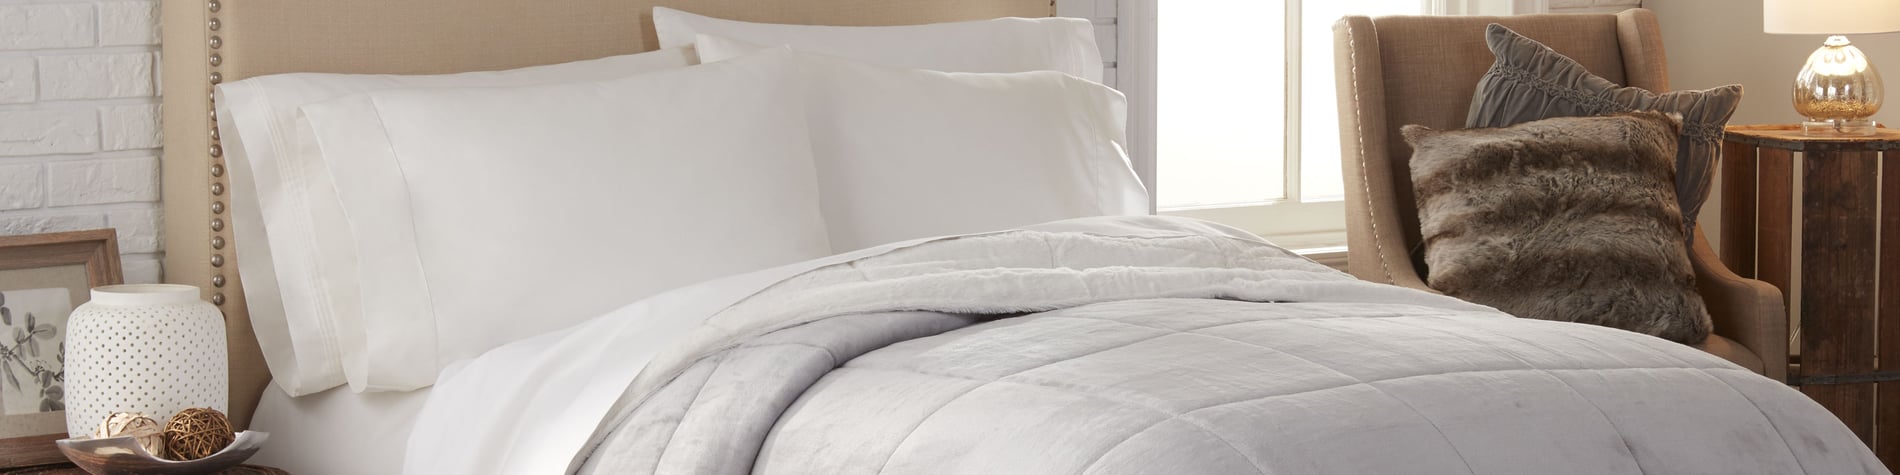 Bedding, Duvet Covers and Pillows 